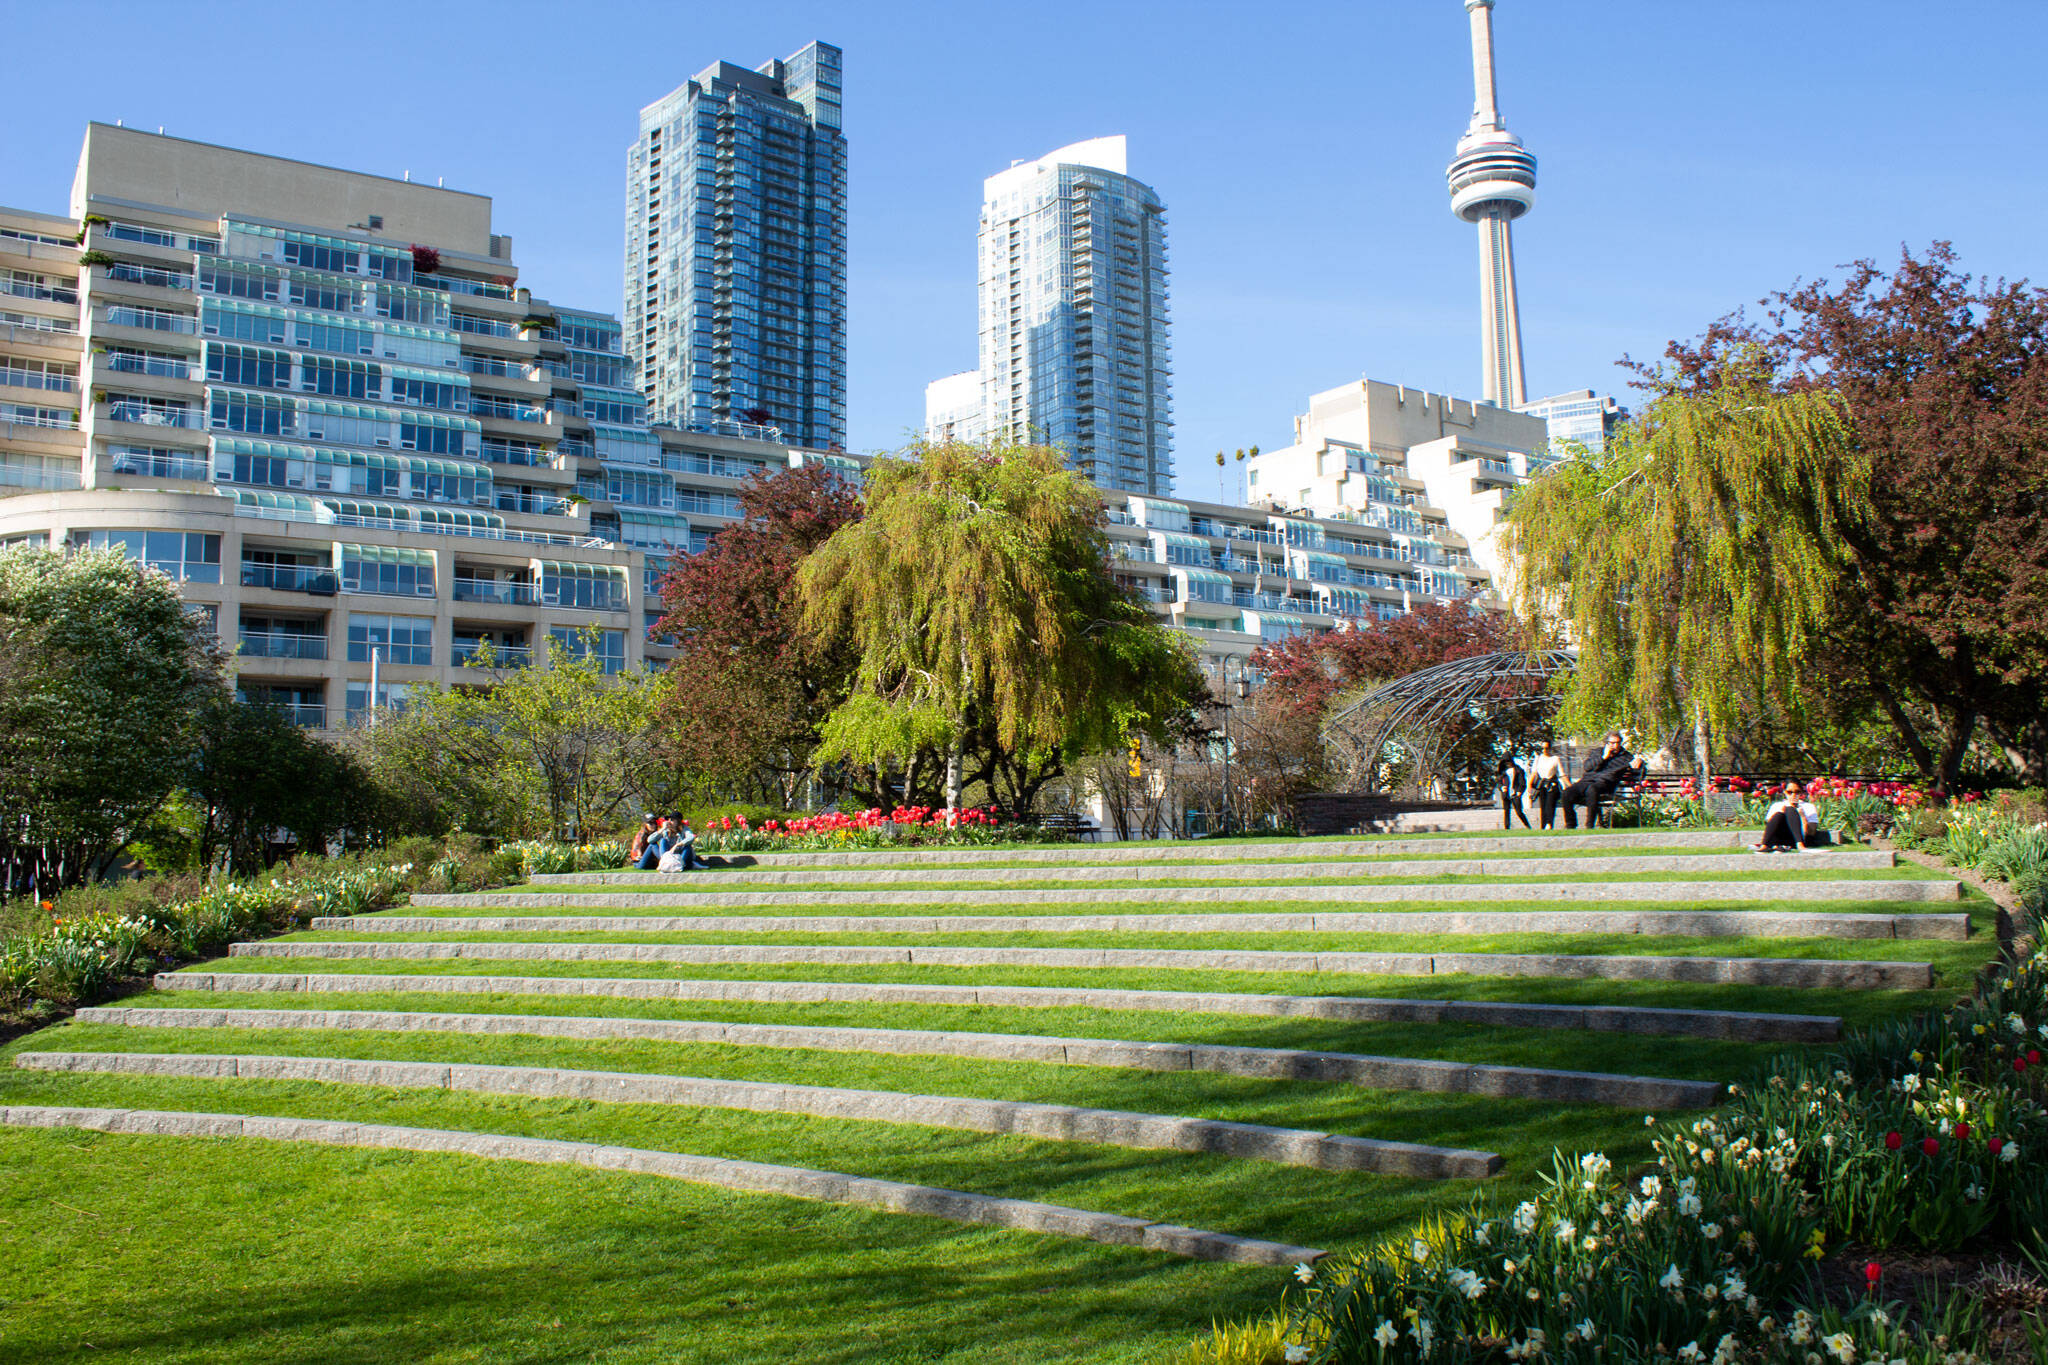 Toronto Music Garden is the serene Bach inspired park by the waterfront